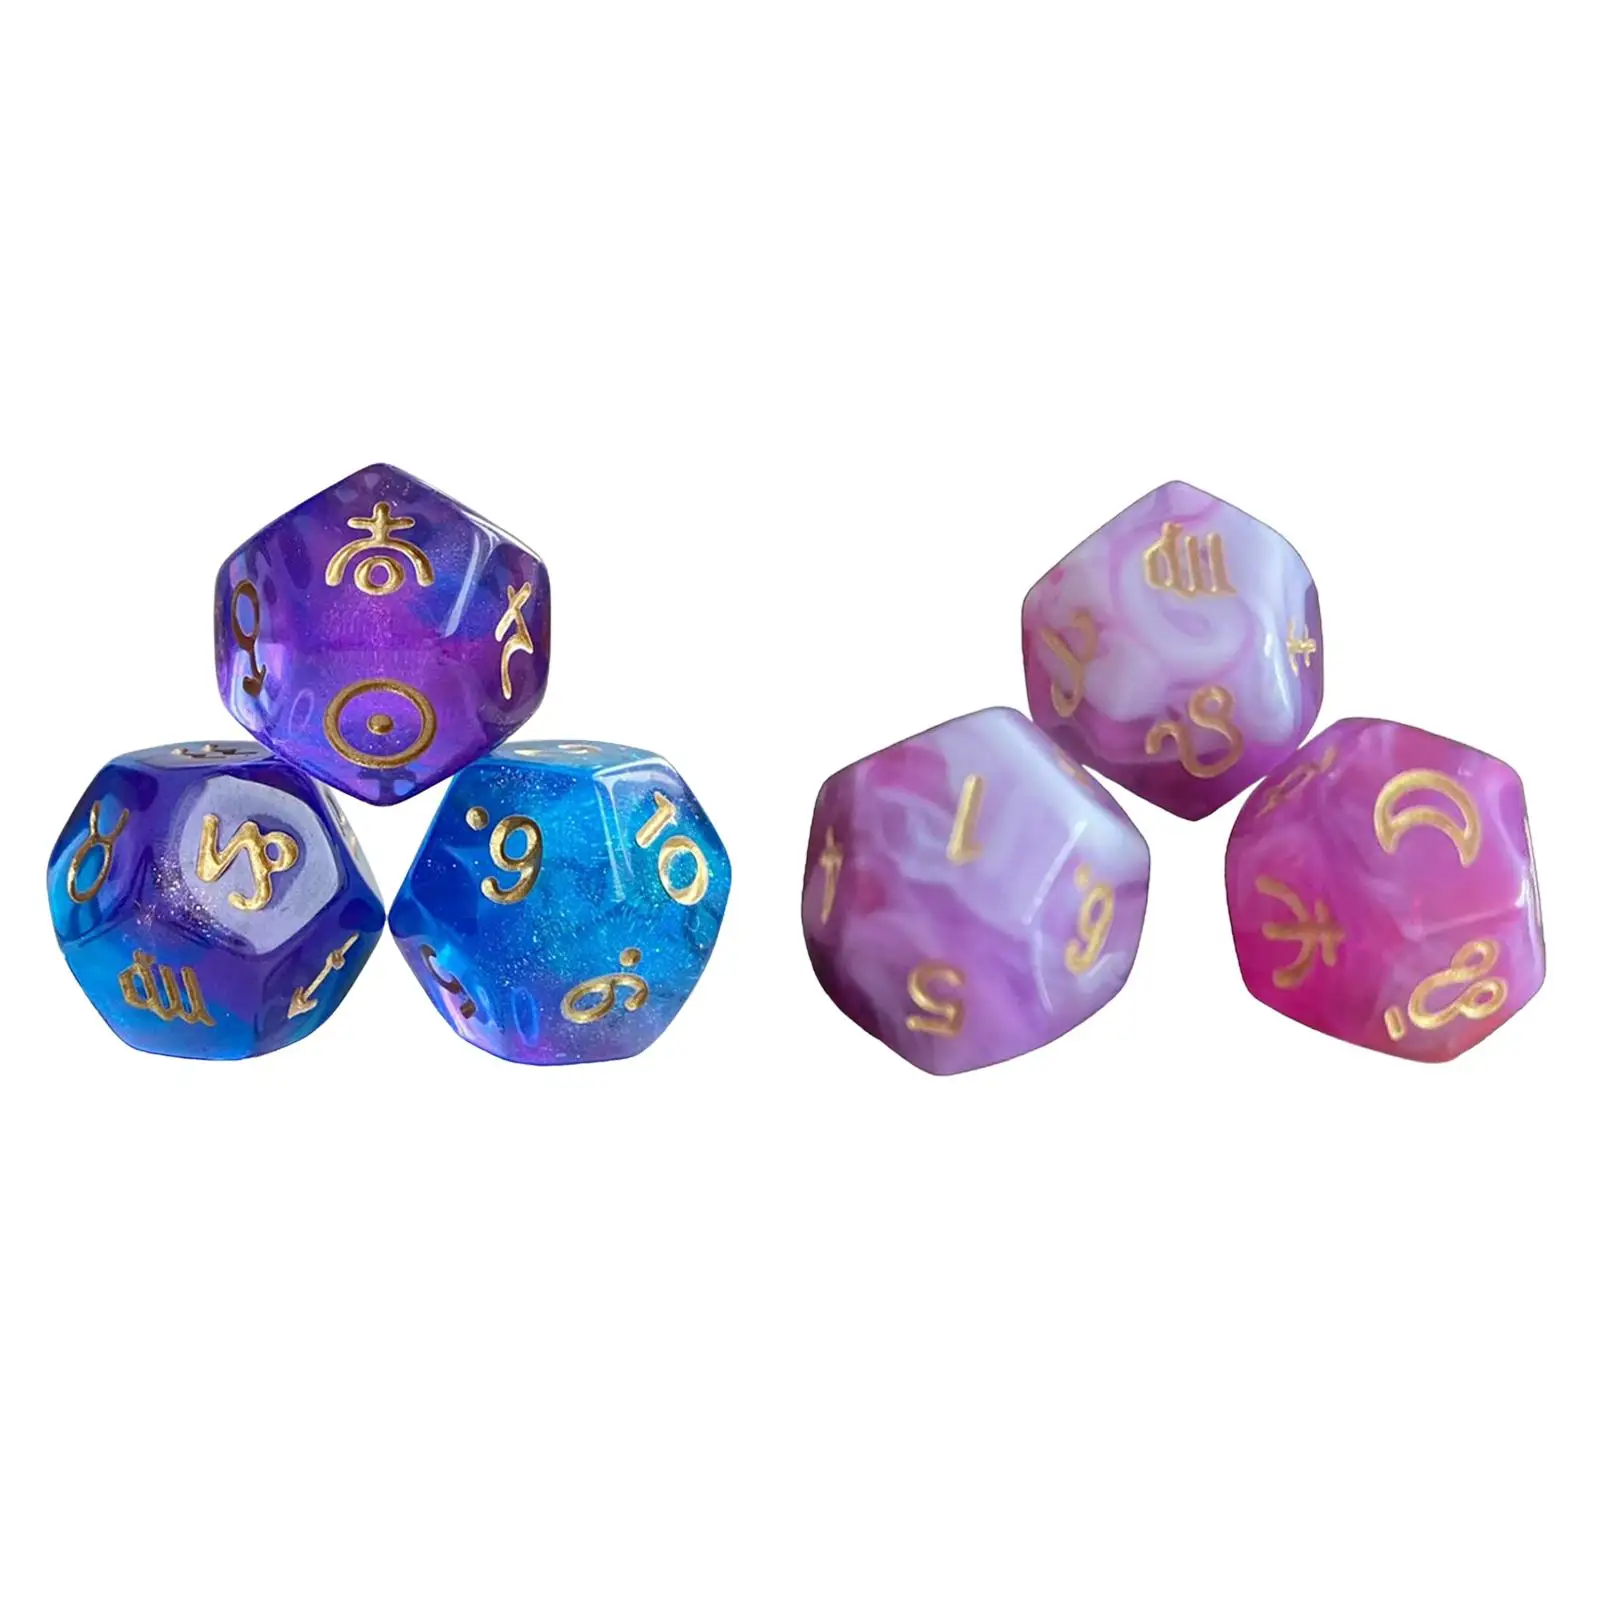 3 Pieces Astrology Signs Dice Exquisite Crafts Multi Sided Dices Collection Acrylic D12 Dice for Party Toy Role Playing Game